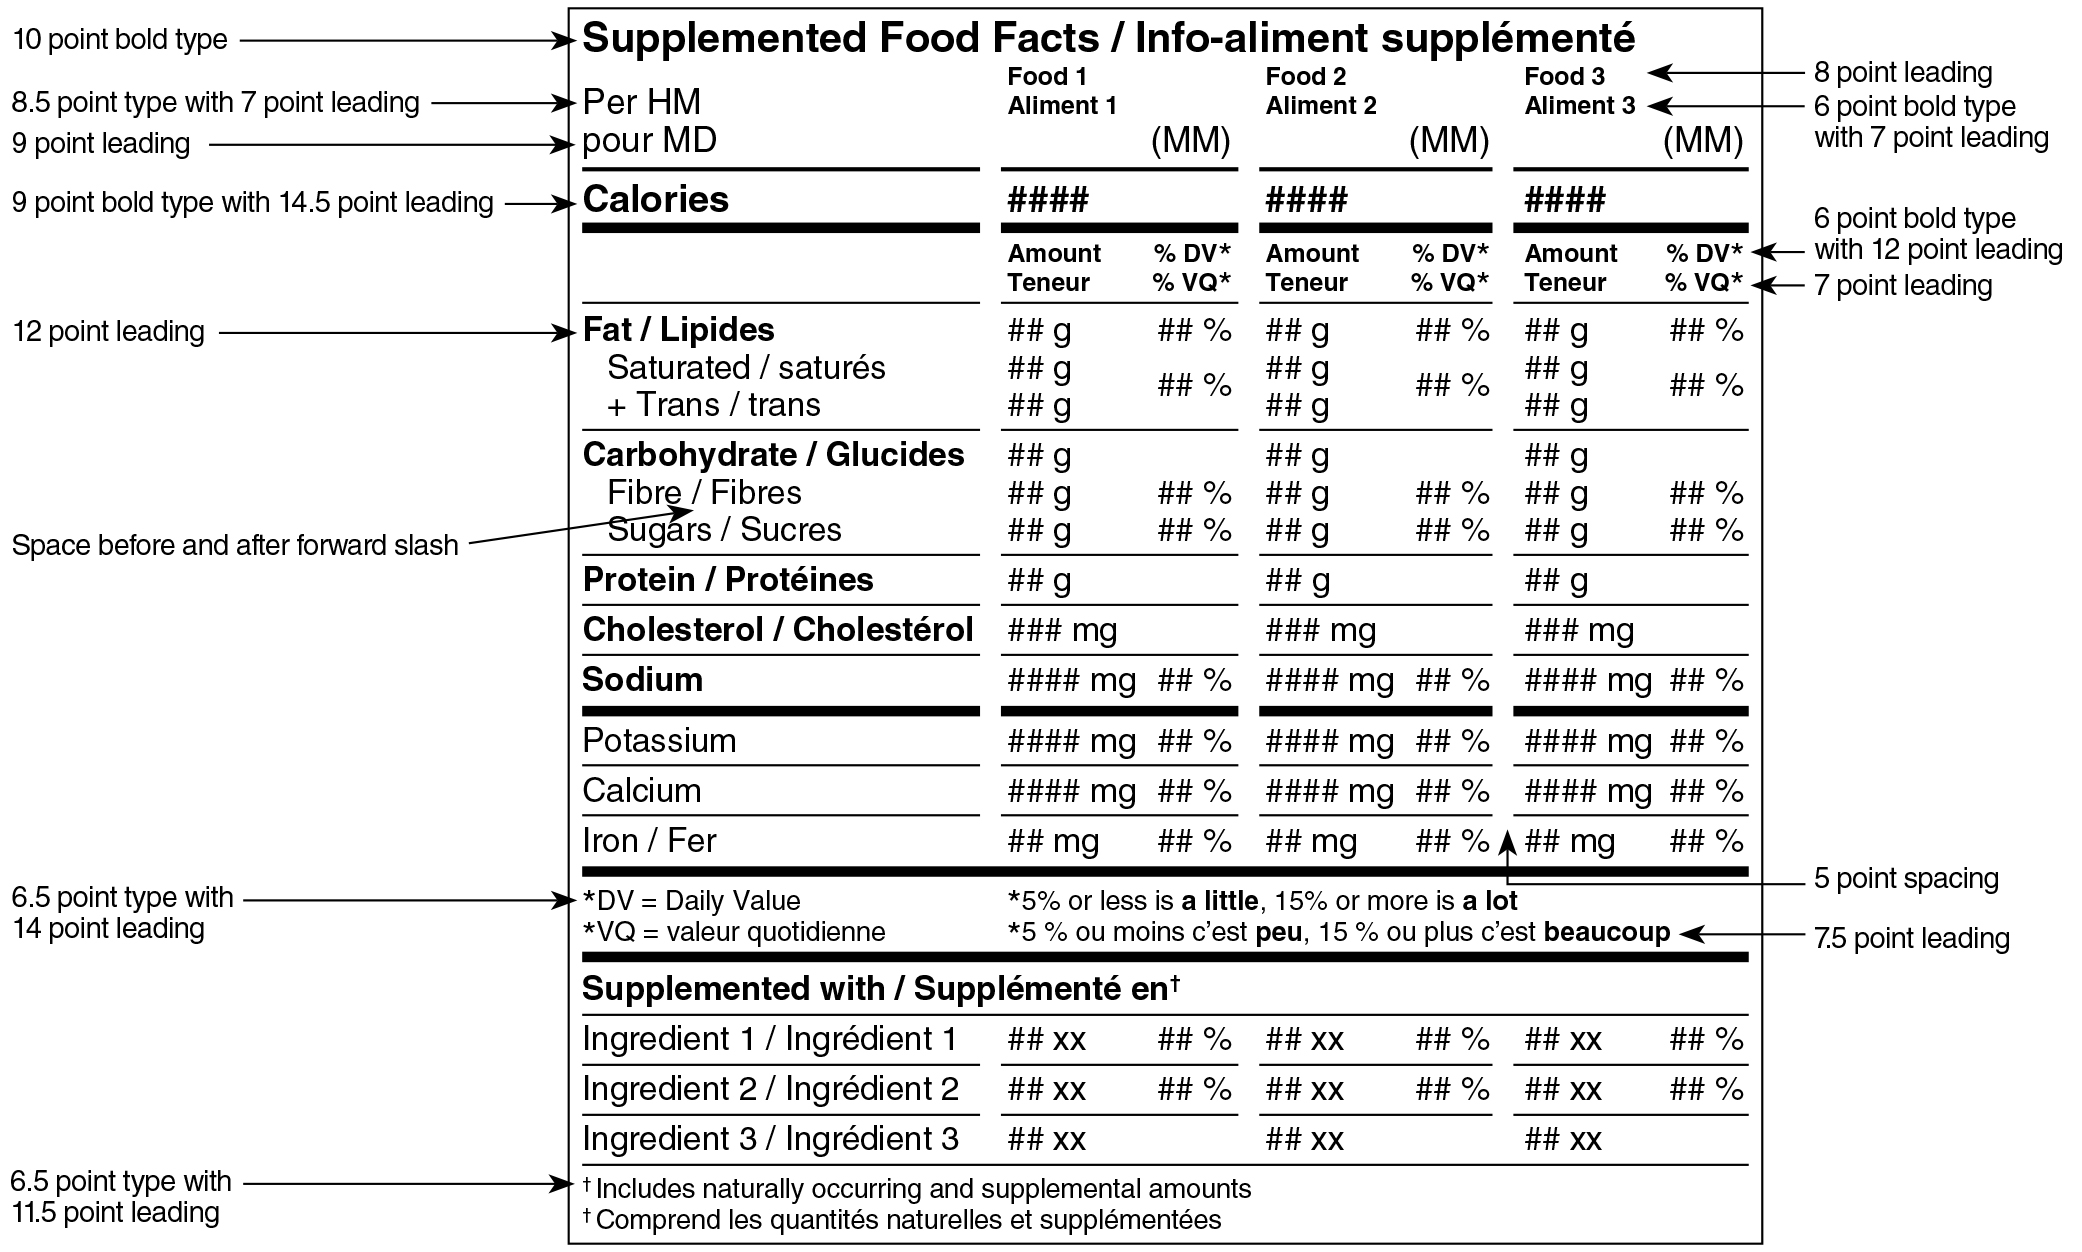 A bilingual Supplemented Food Facts table in aggregate format for three different foods surrounded by specifications. Text version below.